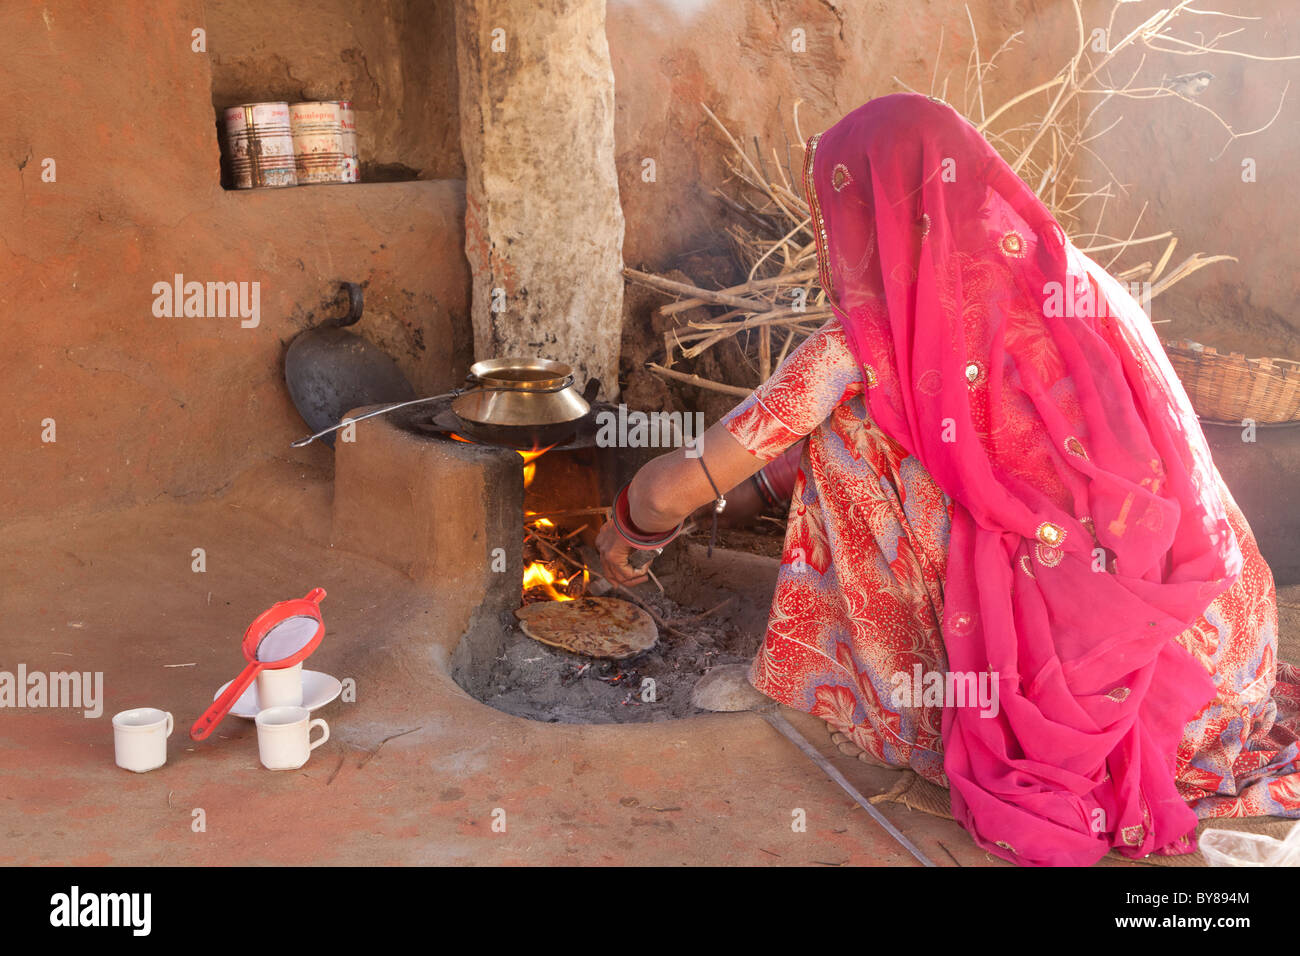 India, Rajasthan, Jodhpur, woman in traditional dress cooking roti (also known as chapati) on open fire Stock Photo